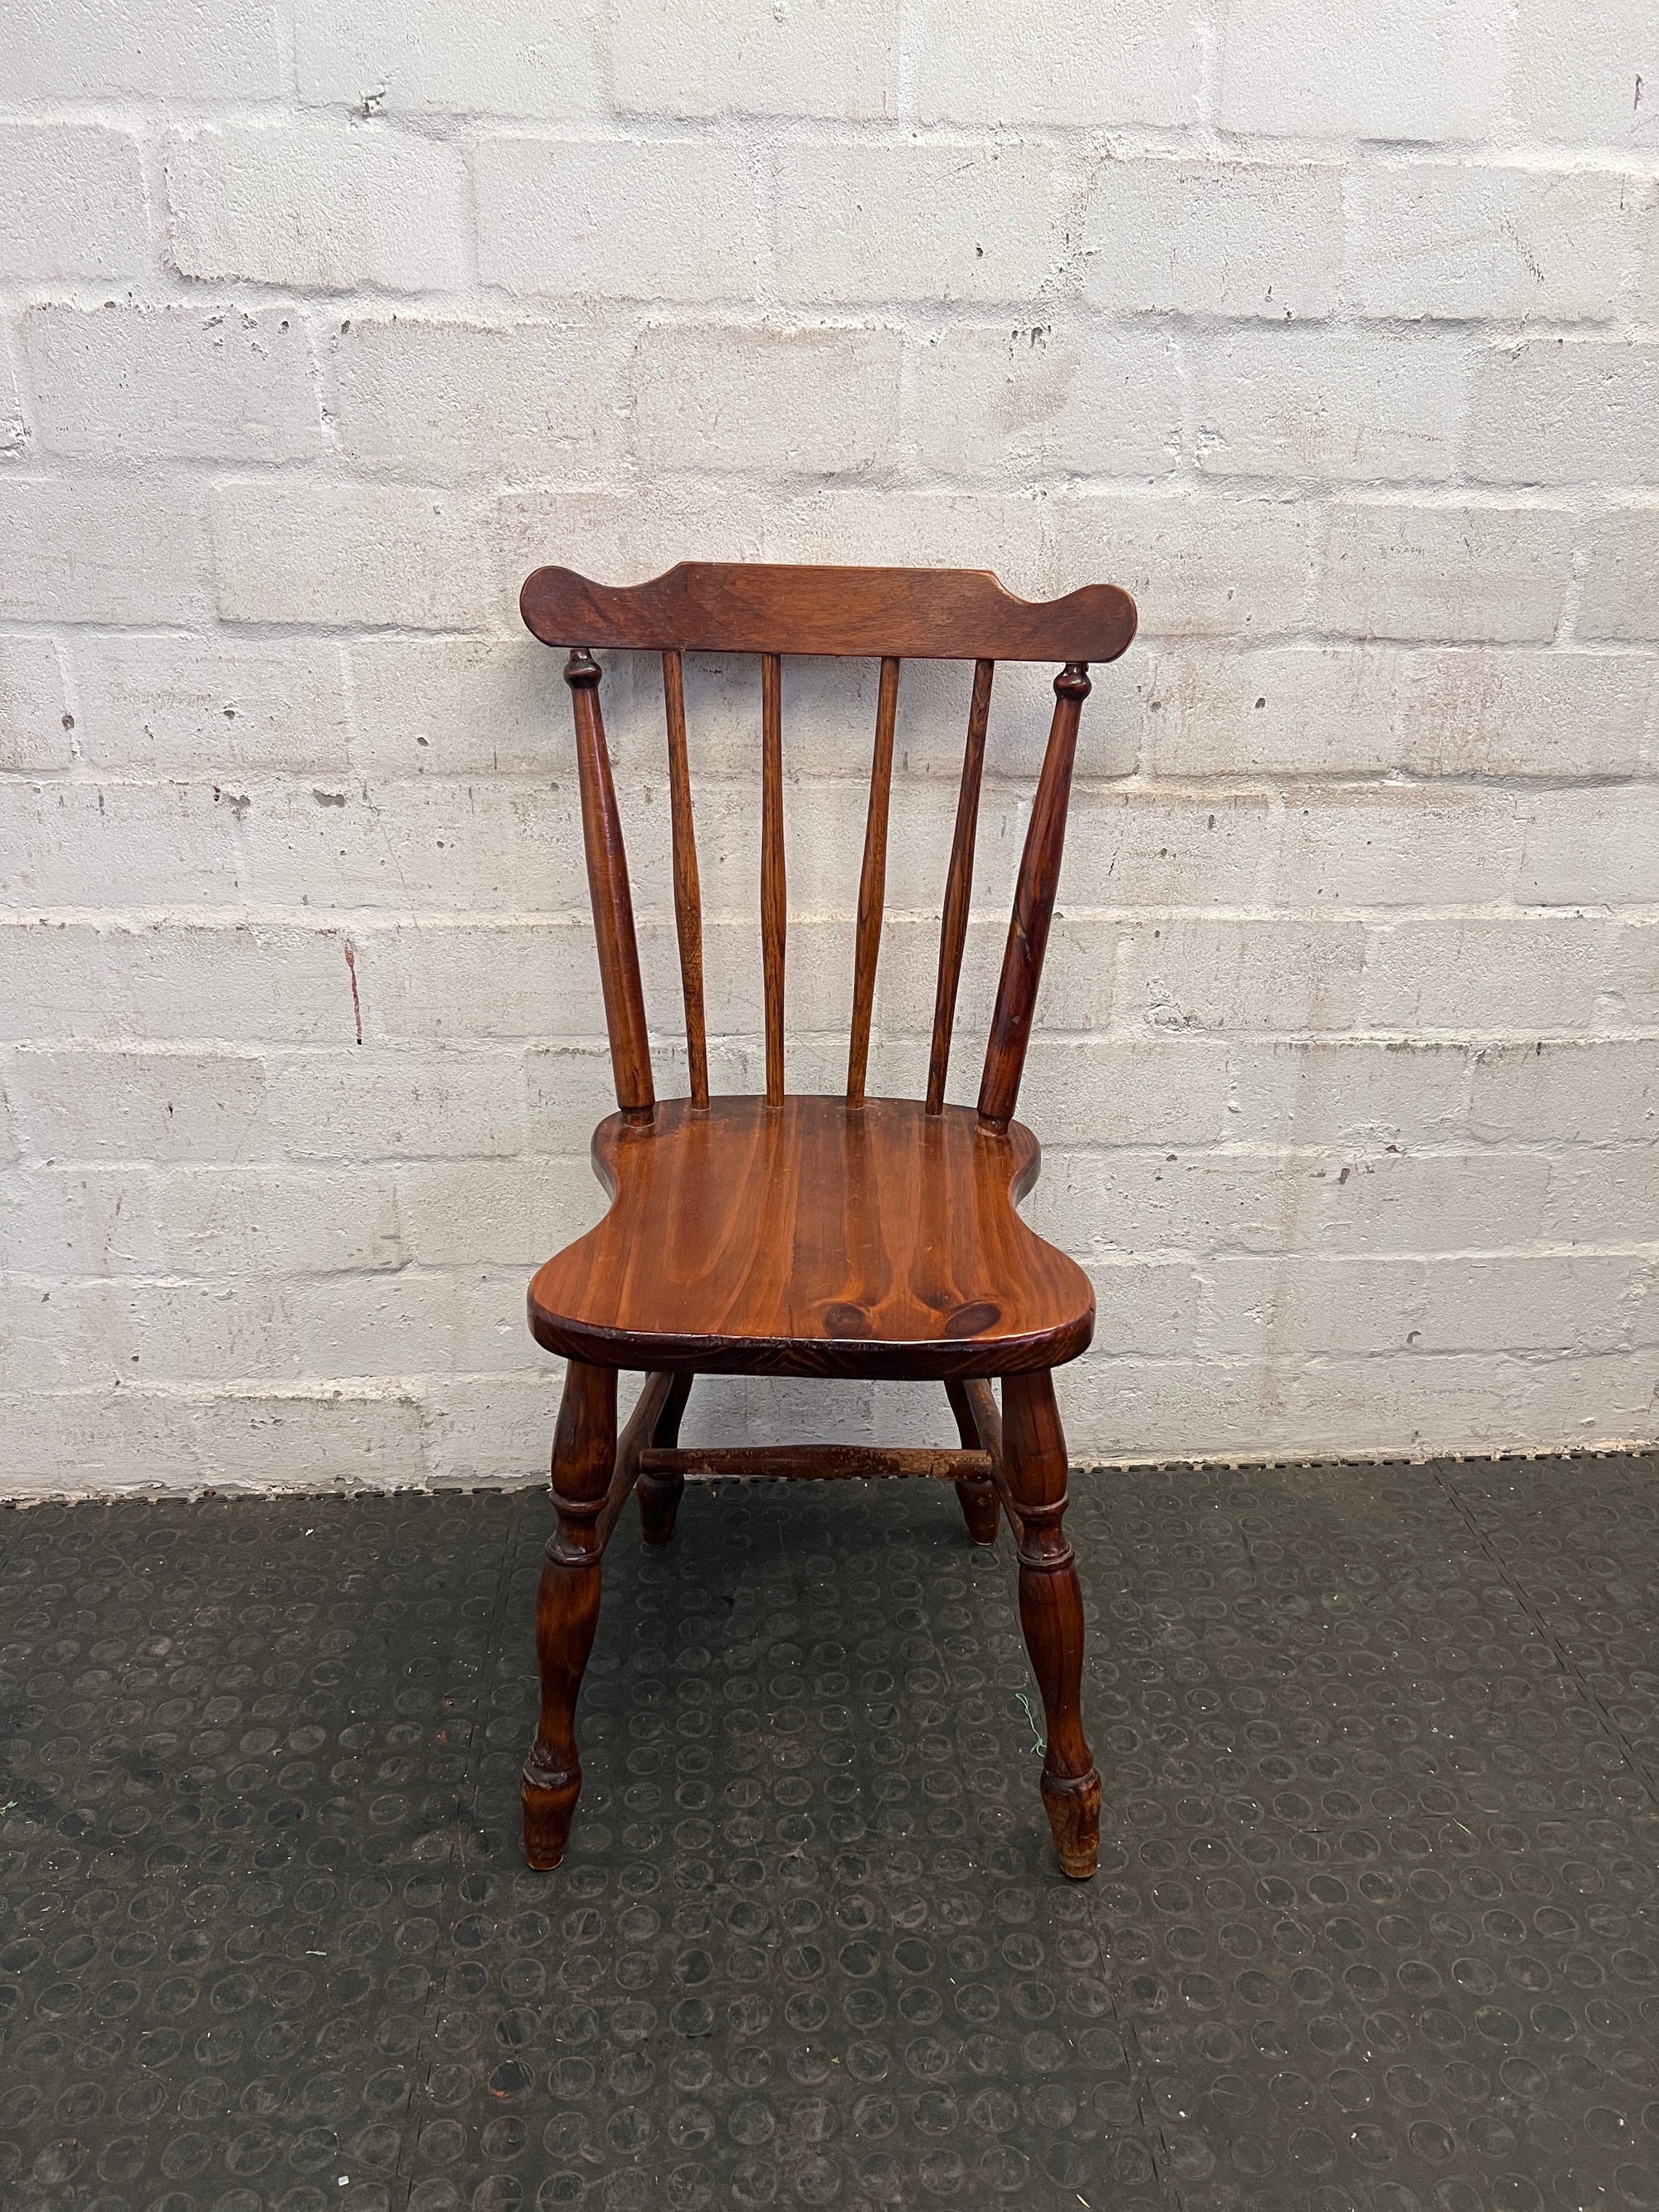 Wooden Slated Dining Chair